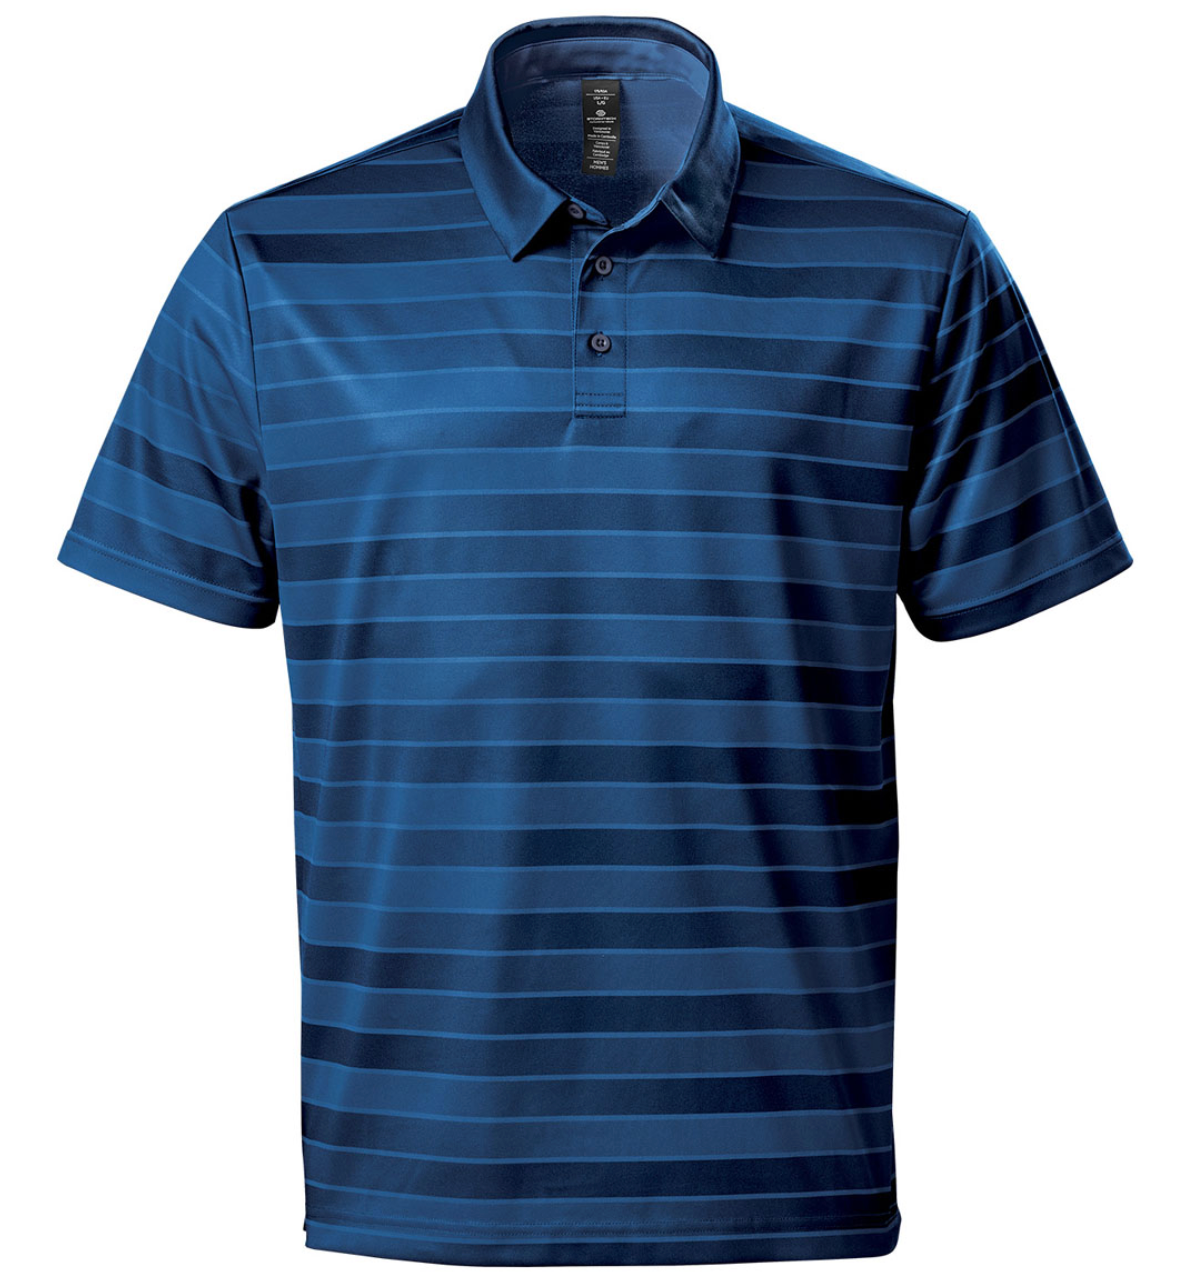 Striped Recycled Golf Shirt